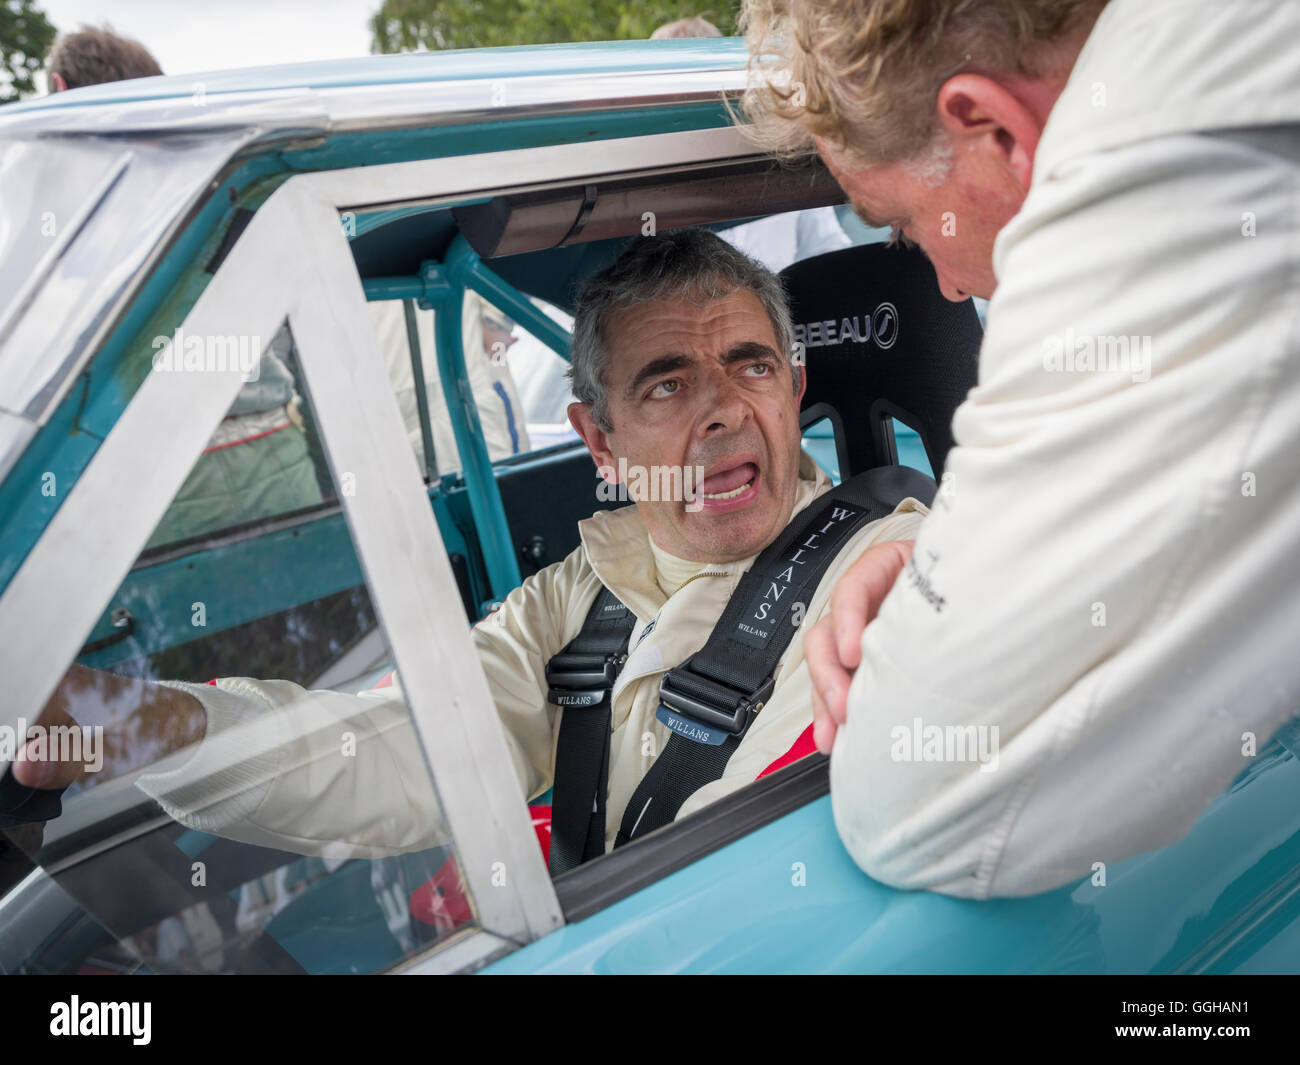 Actor Rowan Atkinson, Mr. Bean, Ford Falcon Sprint, Shelby Cup, Goodwood Revival 2014, Racing Sport, Classic Car, Goodwood, Chic Stock Photo